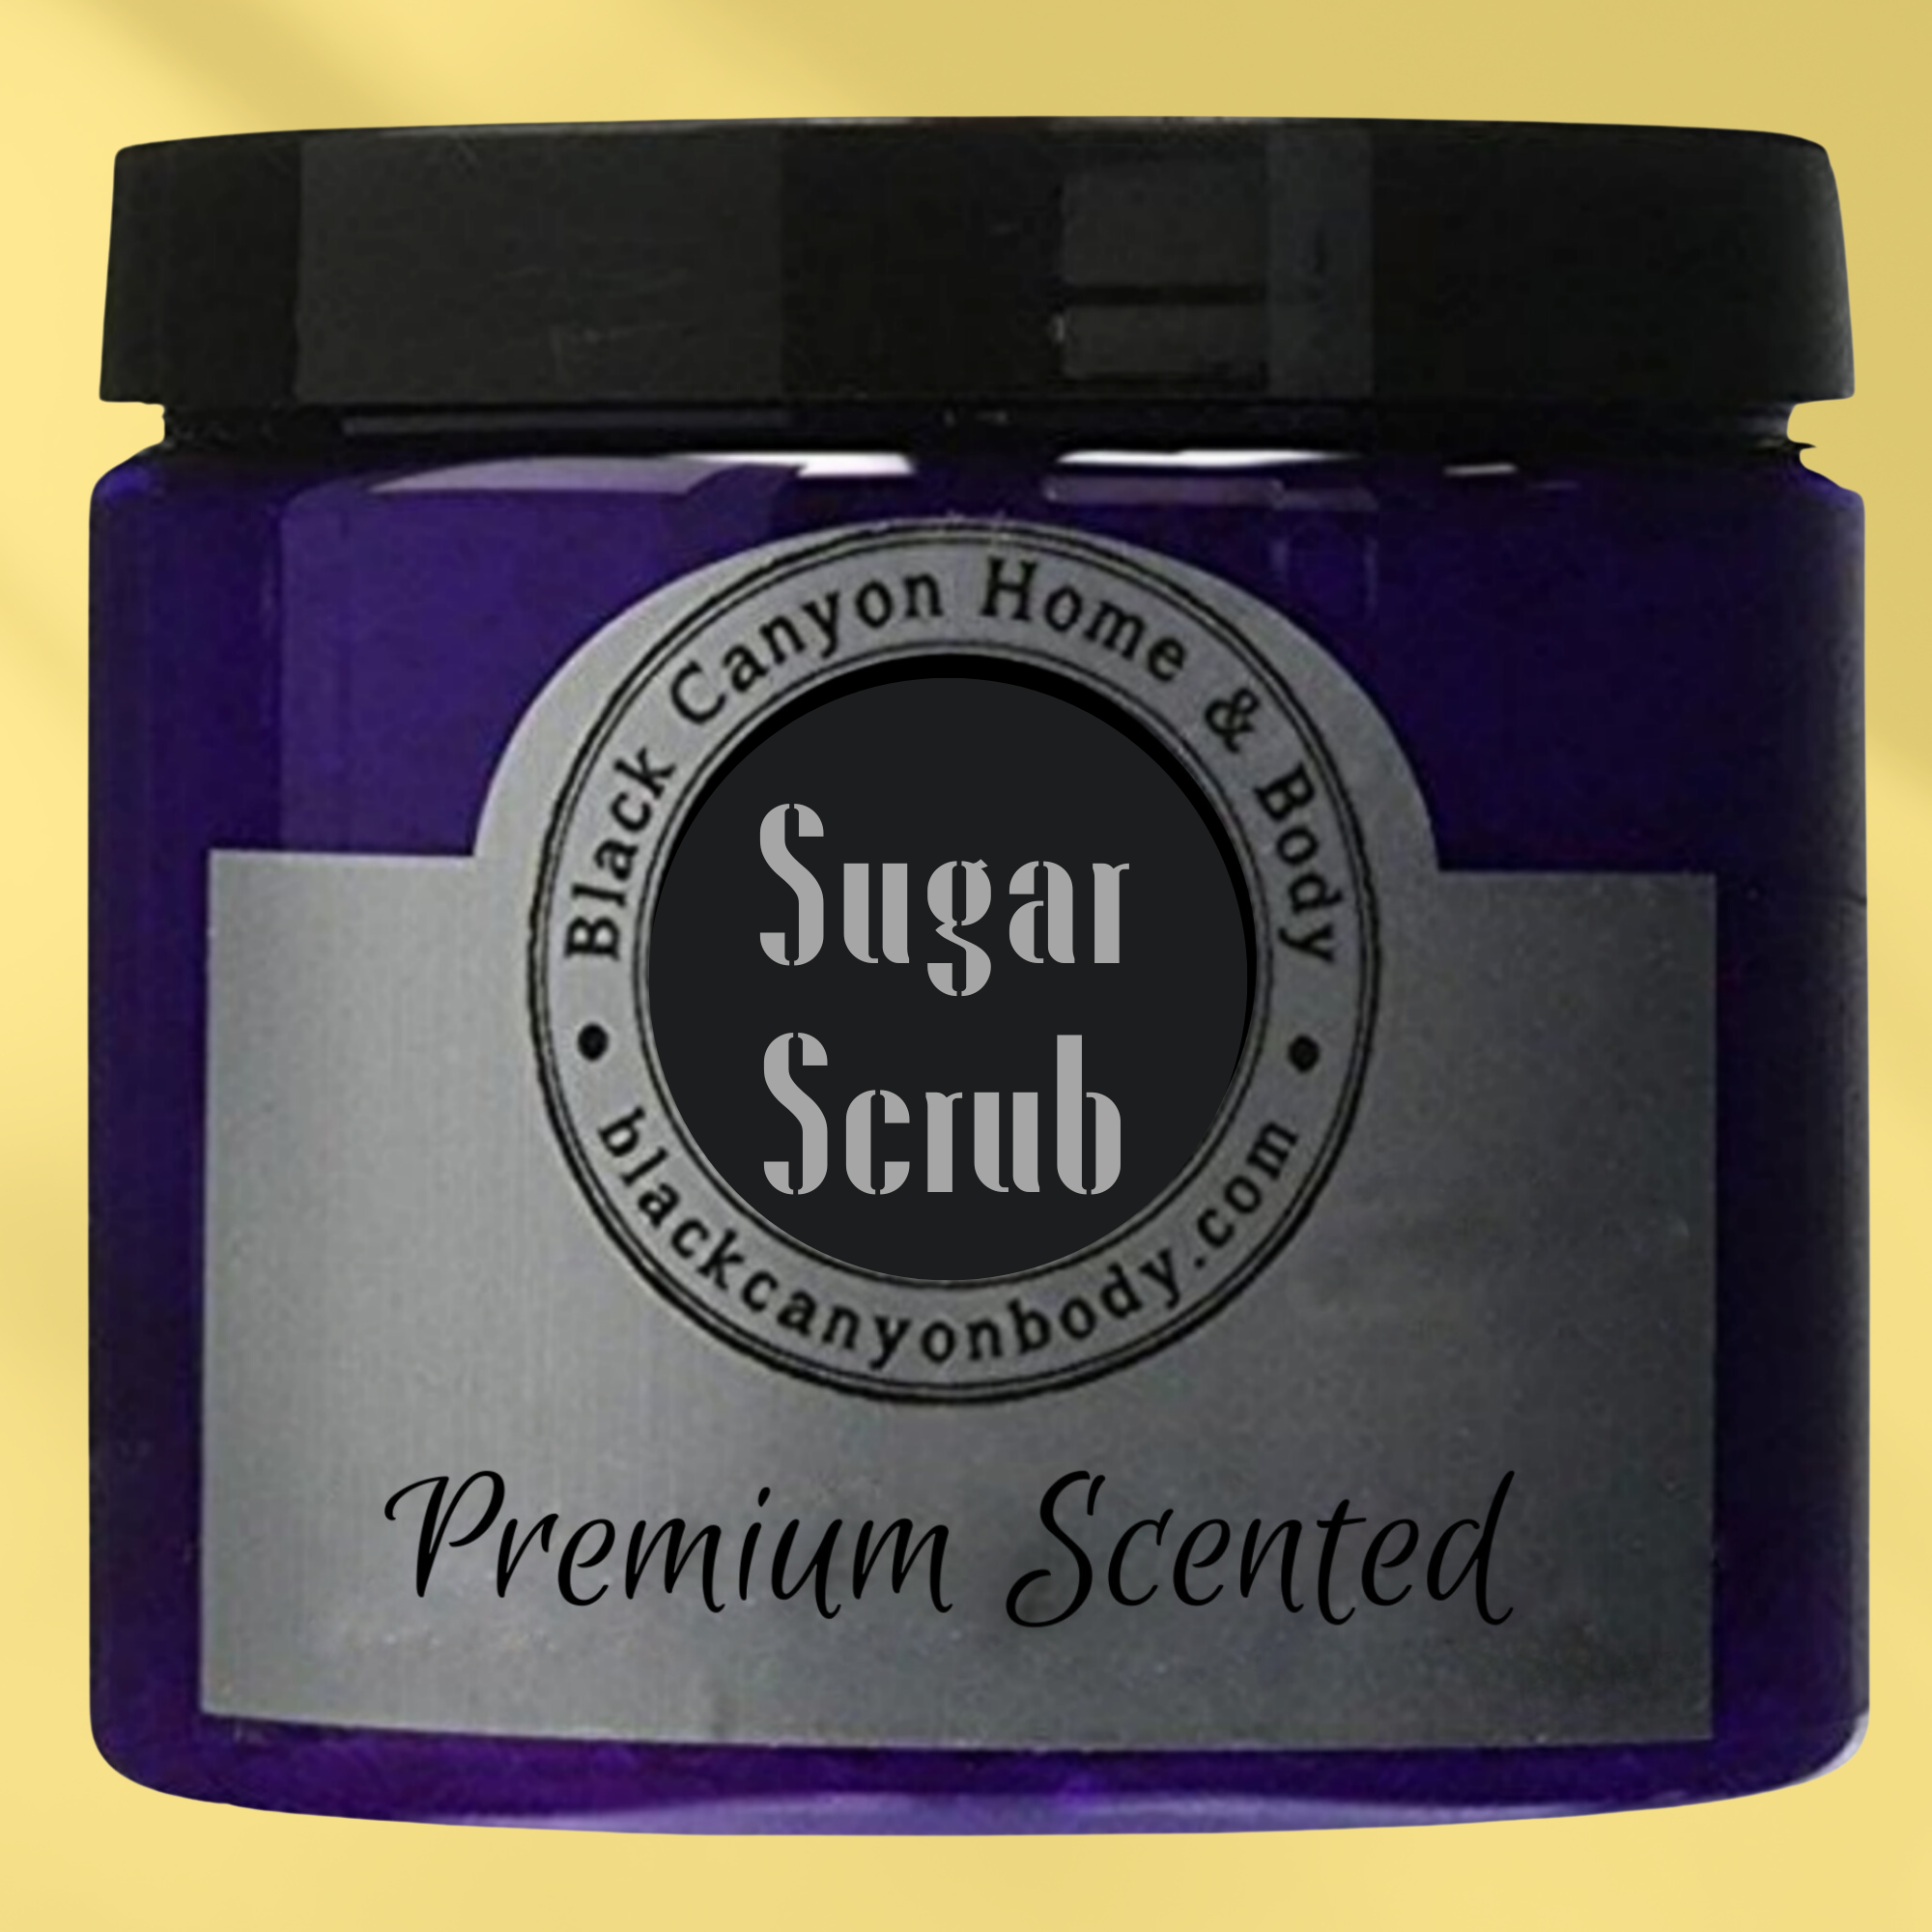 Black Canyon Chocolate Chip Cookie Scented Sugar Scrub